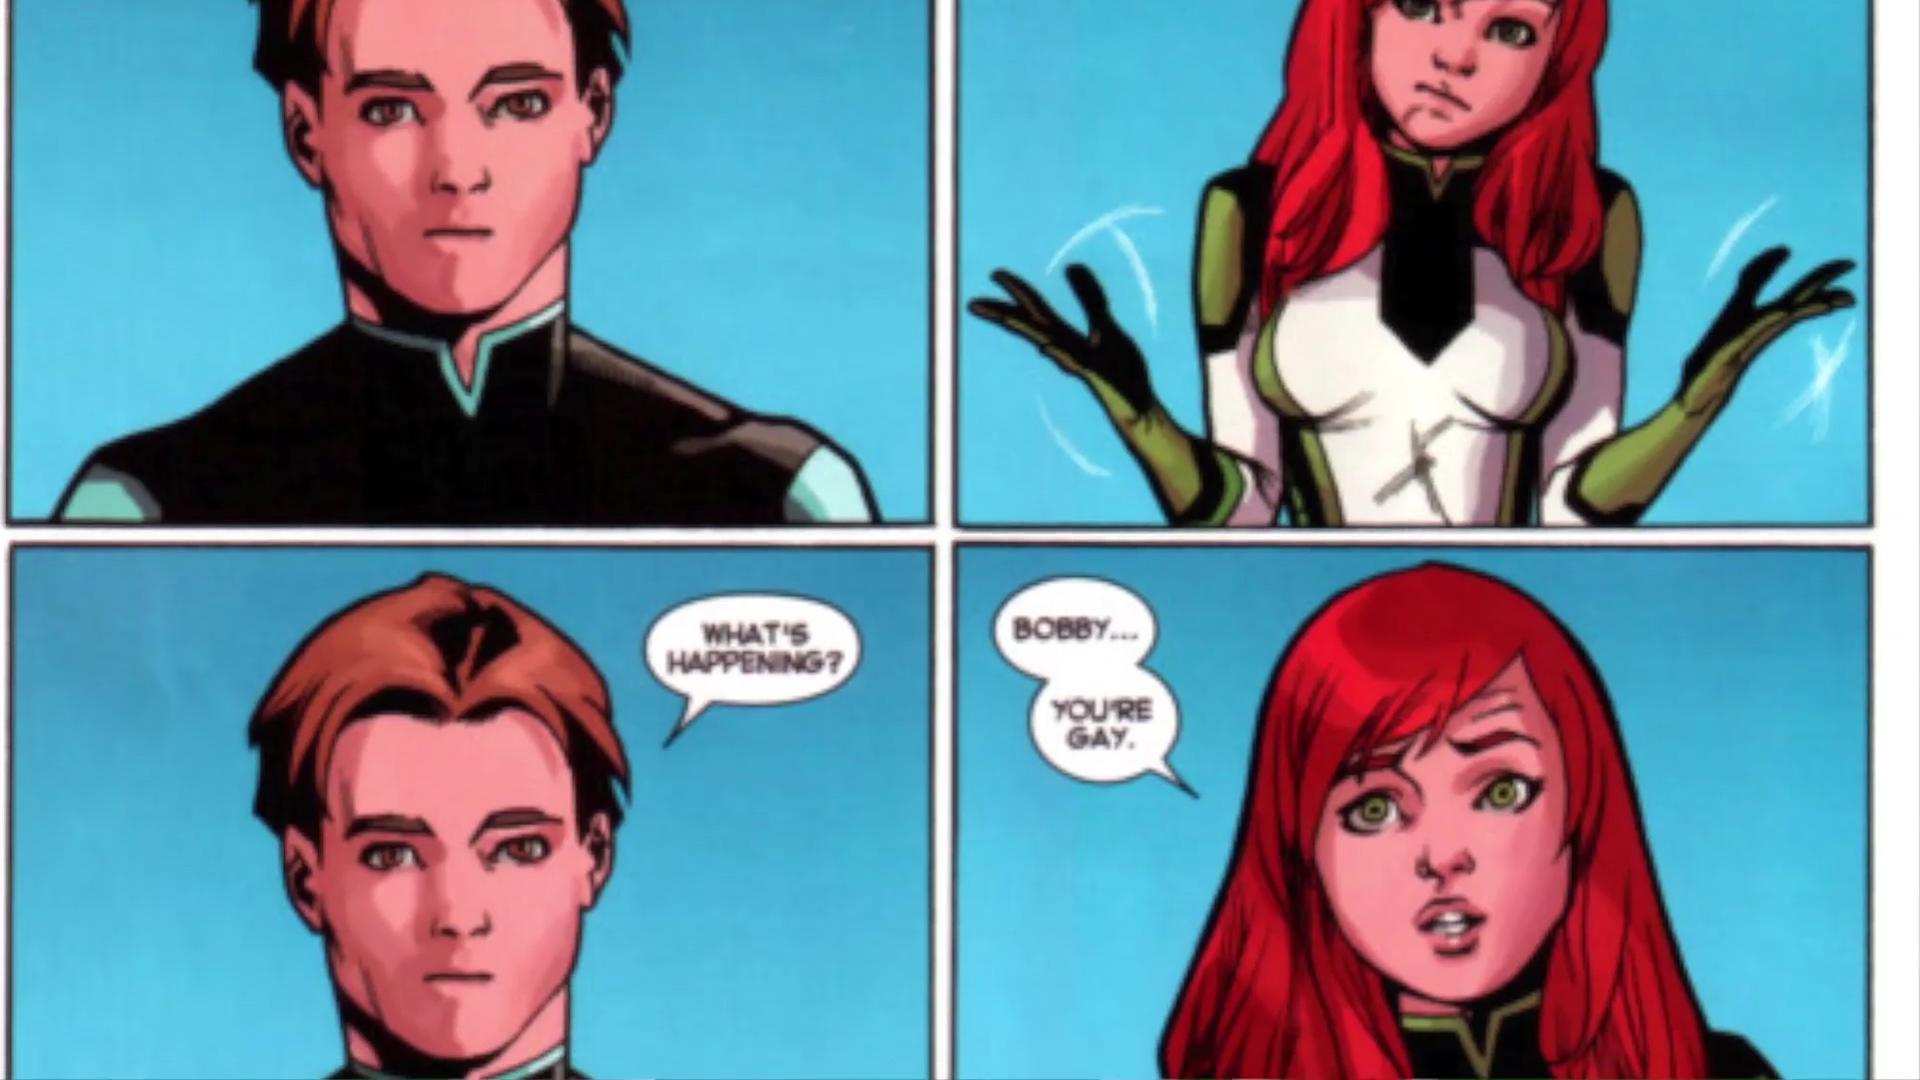 One Of The Original X Men Reveals Hes Gay In New Comic Book 0621